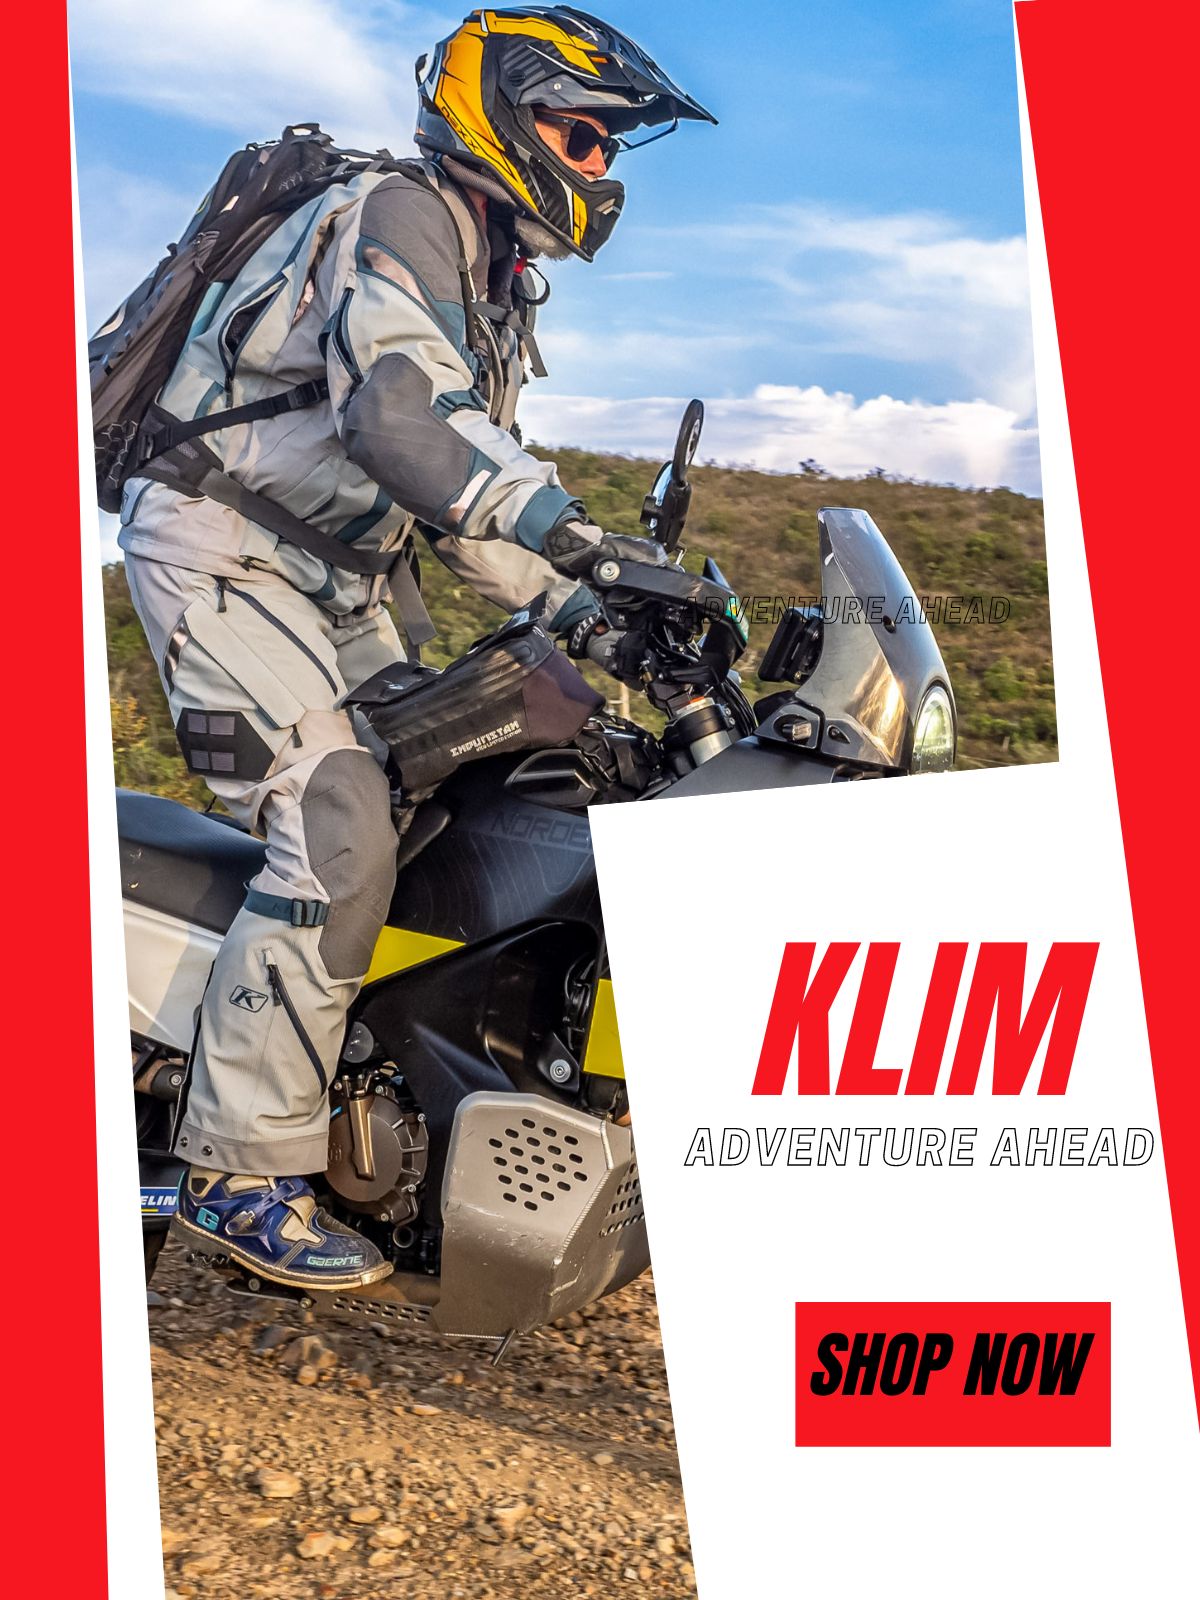 Shop Toys for Big Boys - Clothing, Riding Gear, Parts and More!